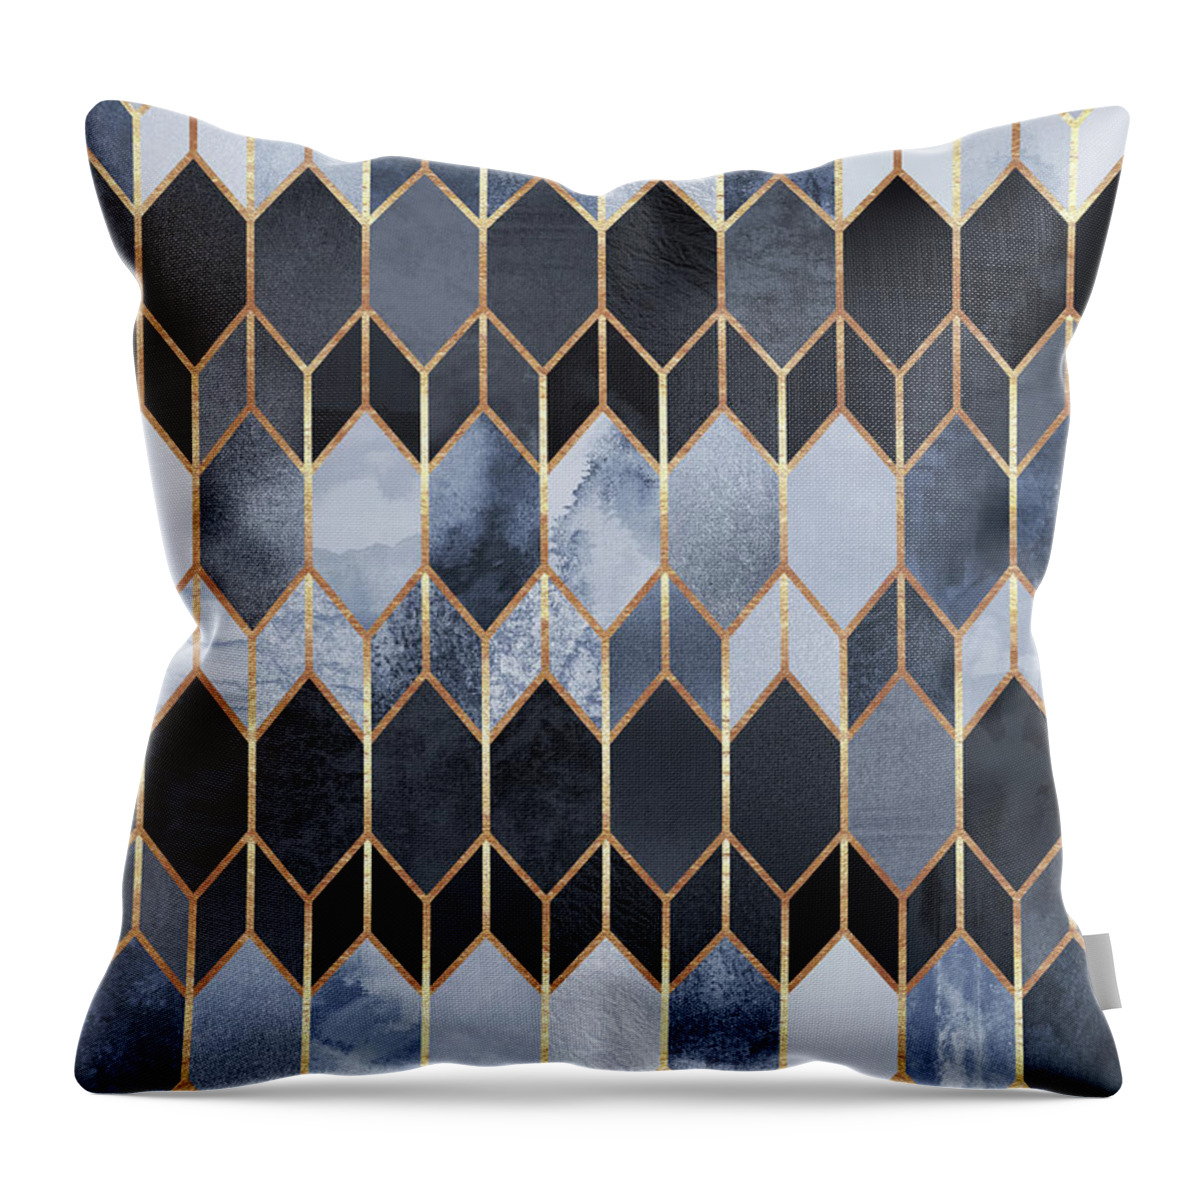 Graphic Throw Pillow featuring the digital art Stained Glass 4 by Elisabeth Fredriksson